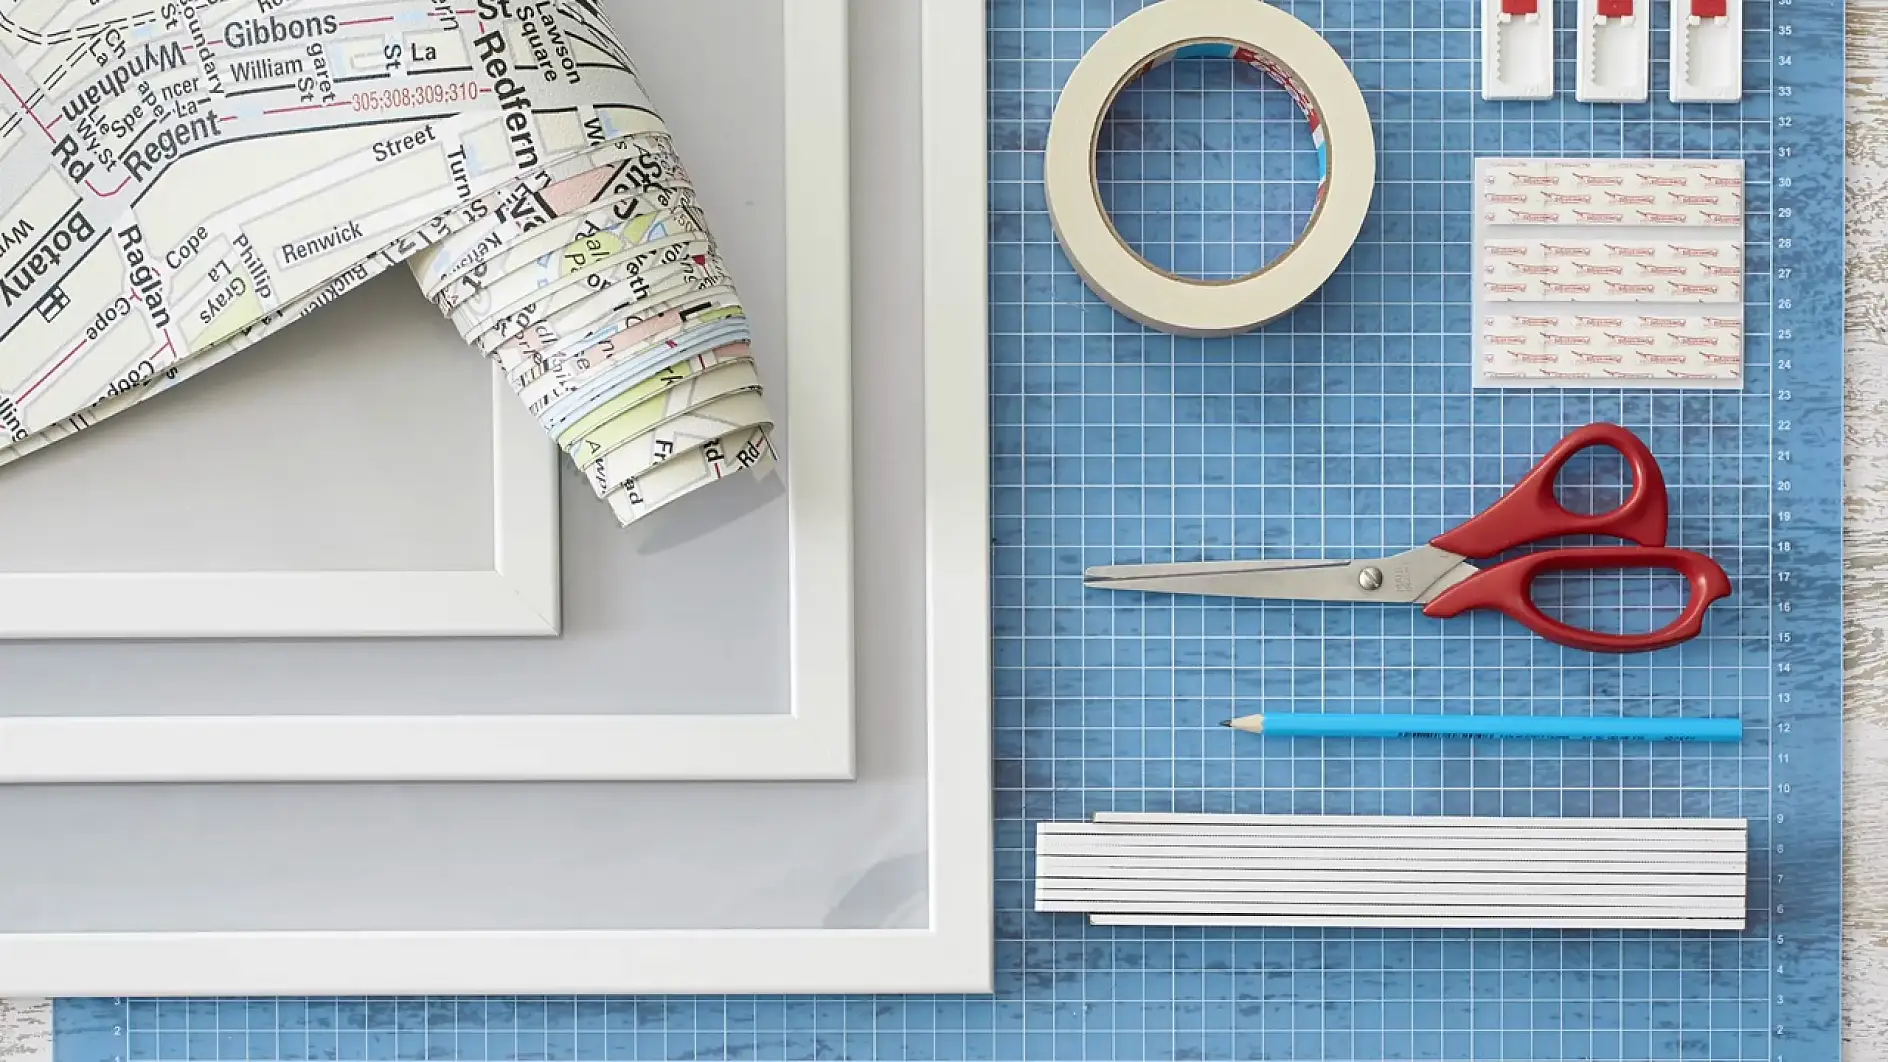 Make your own multi piece wall art!